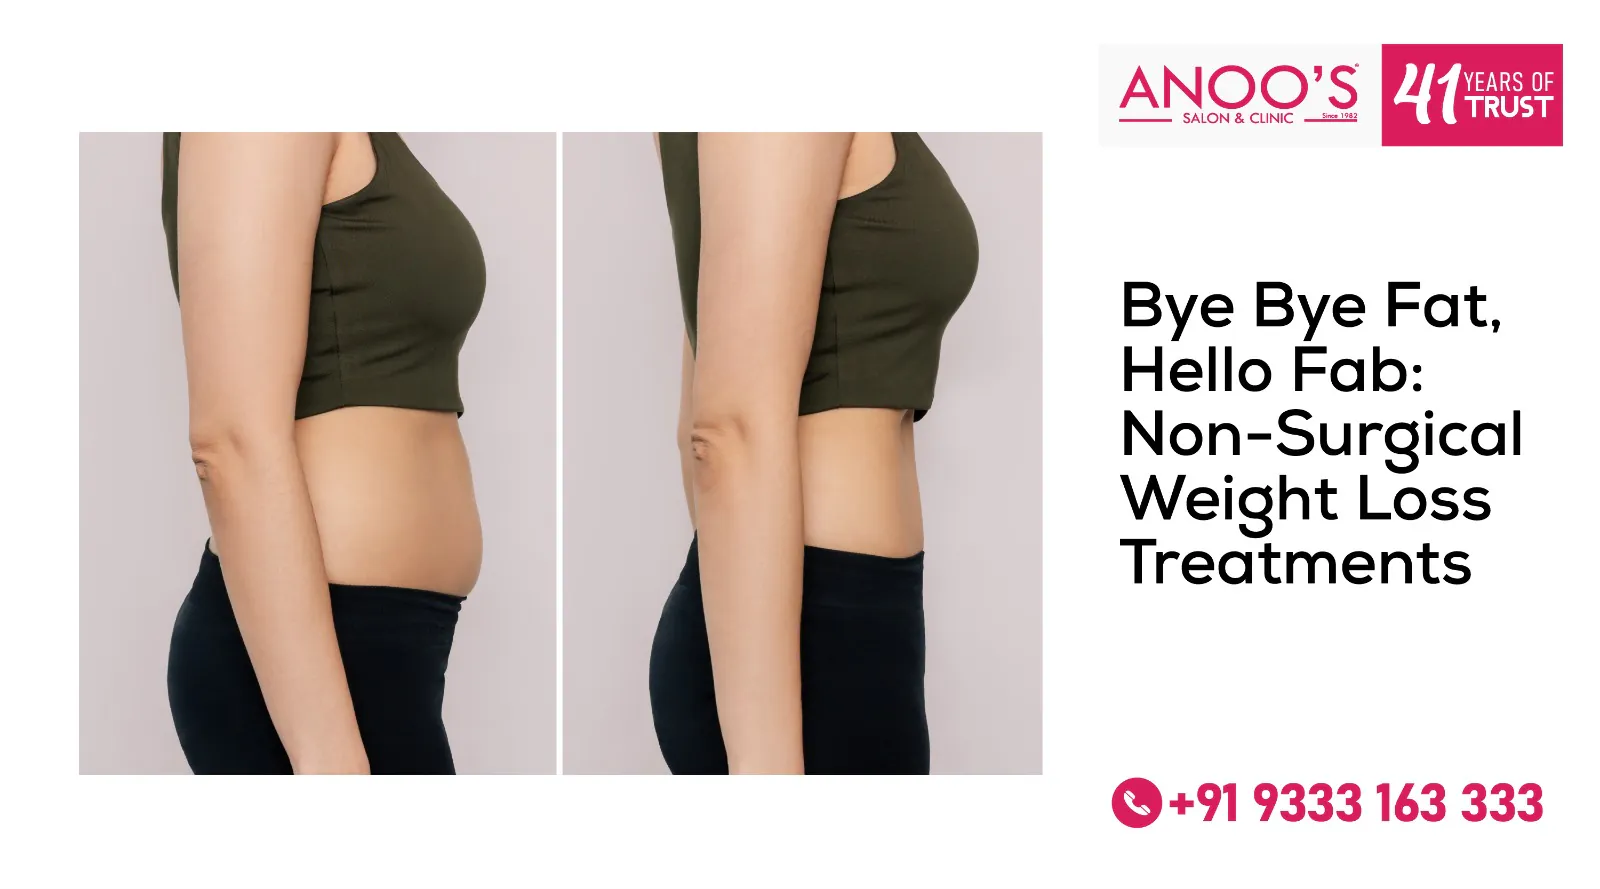 Bye Bye Fat, Hello Fab: Non-Surgical Weight Loss Treatments